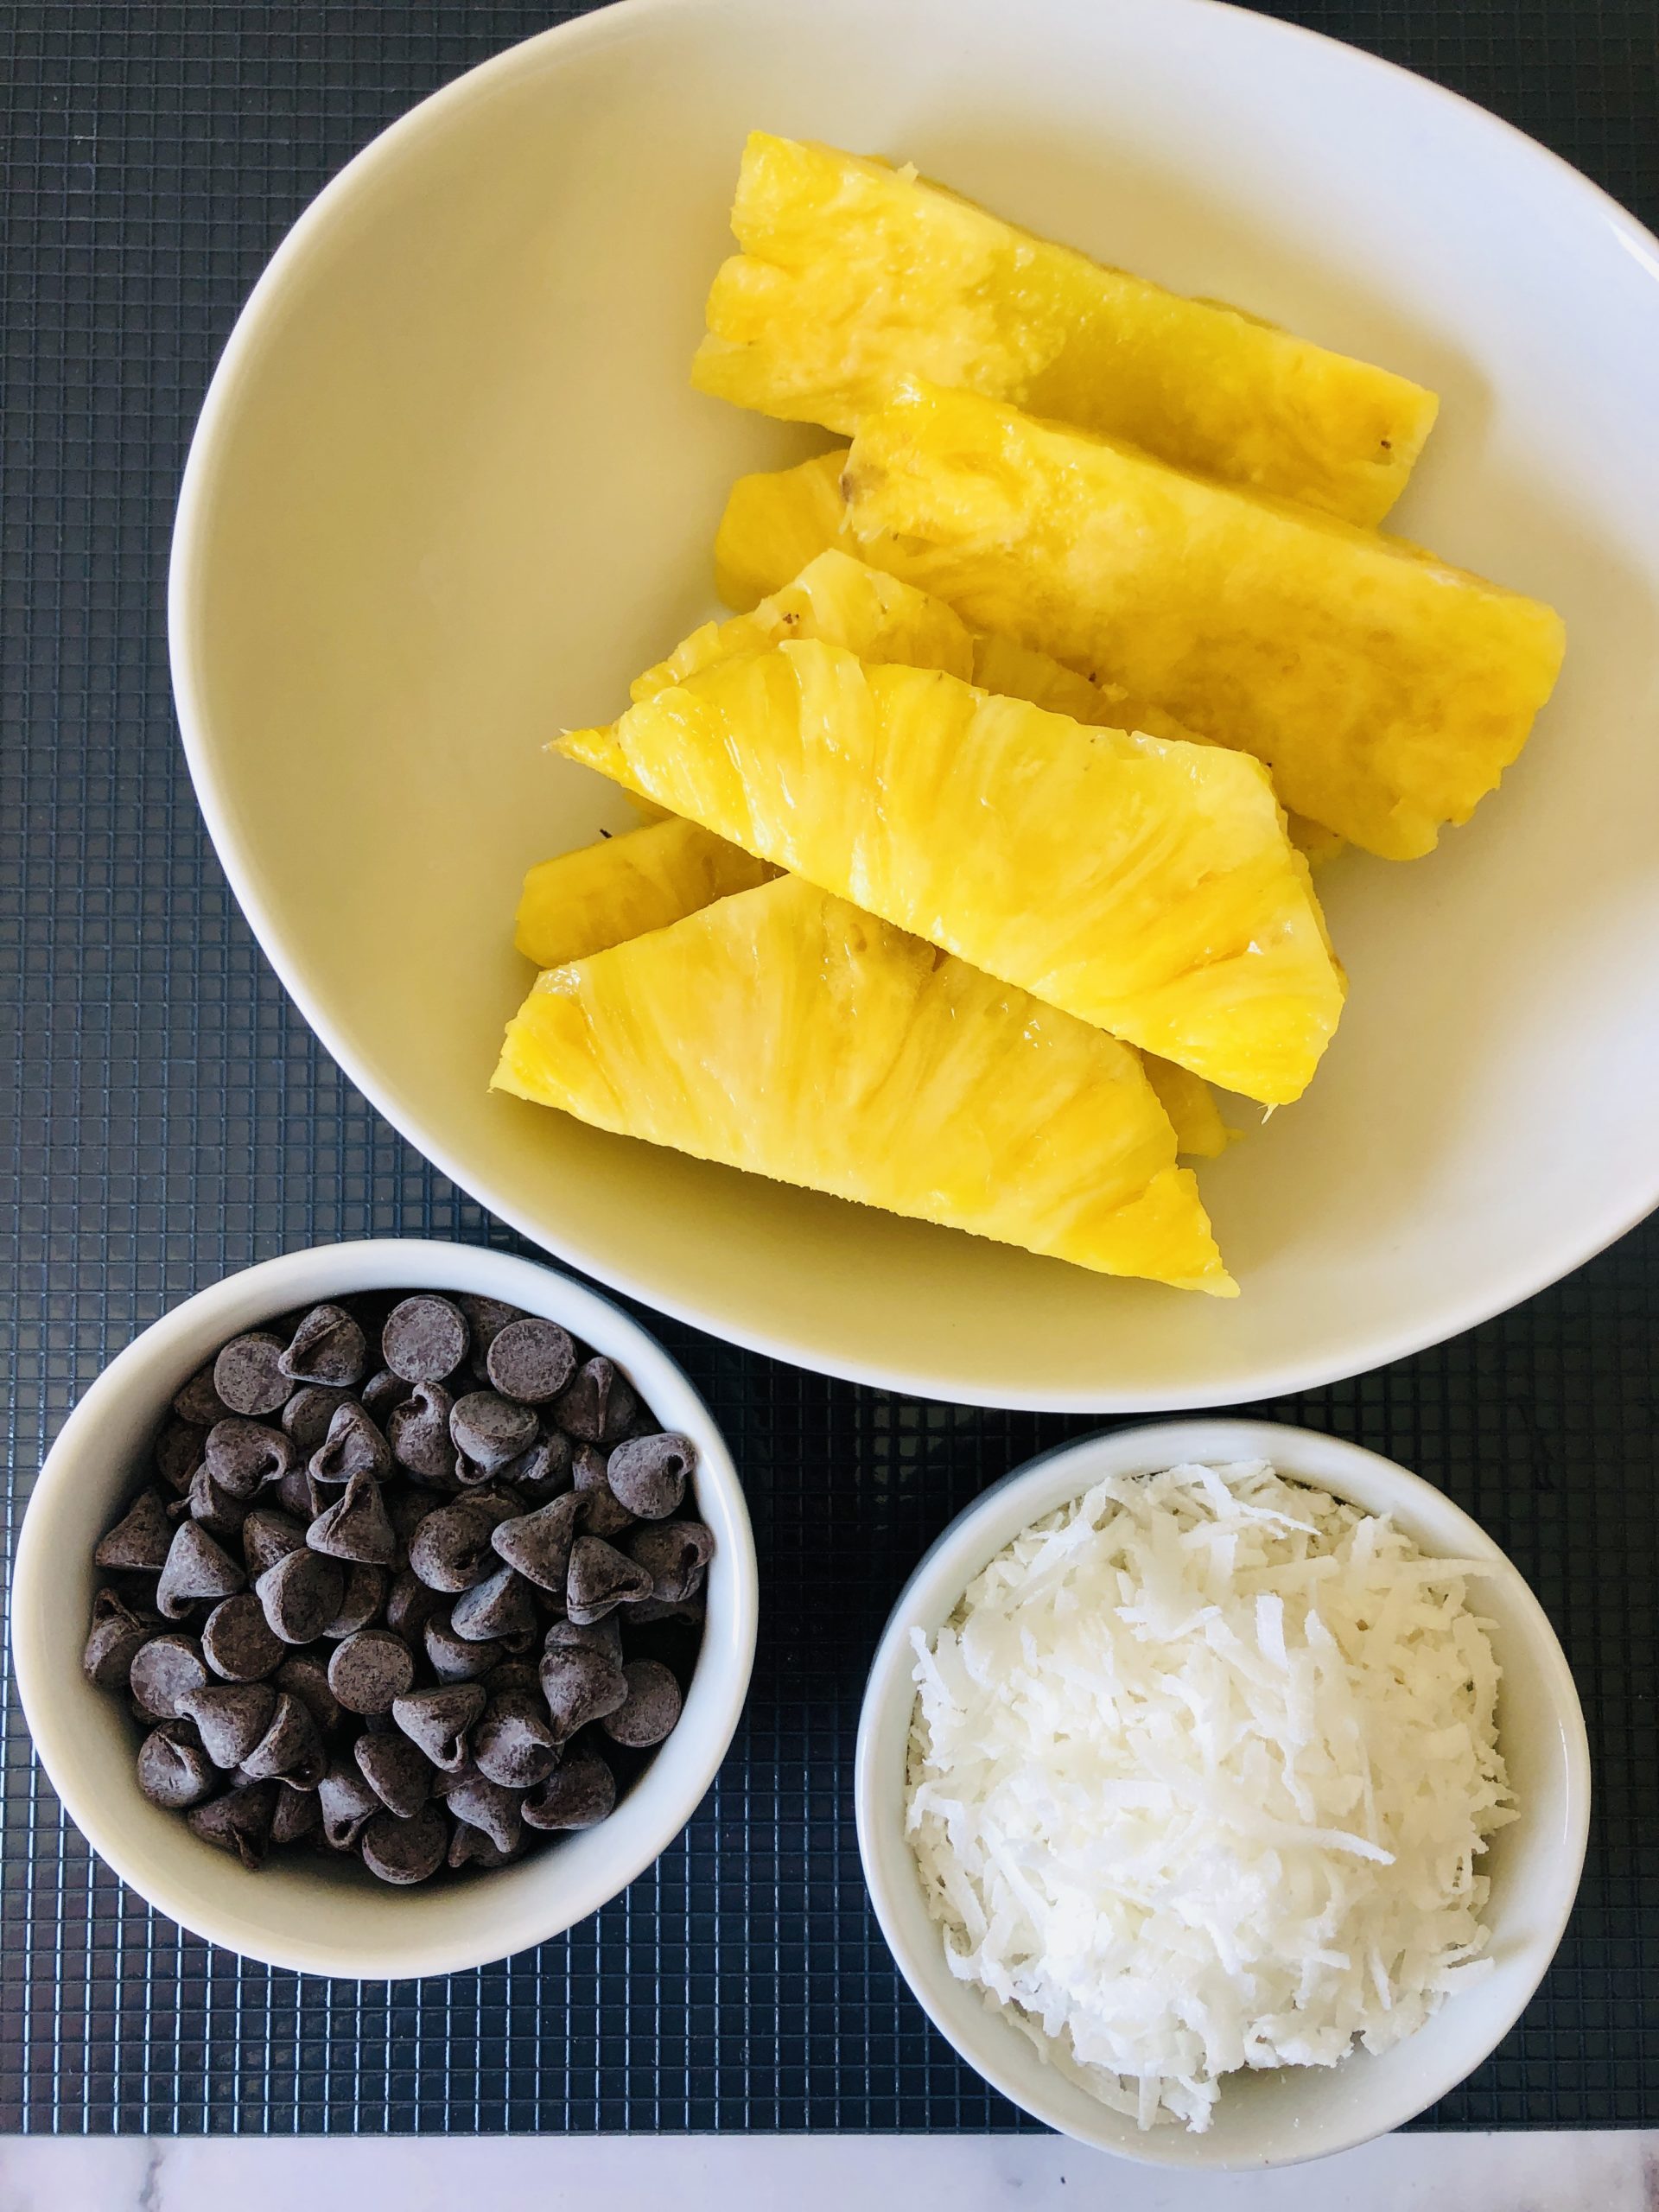 Bowls of pineapple chocolate and coconut.